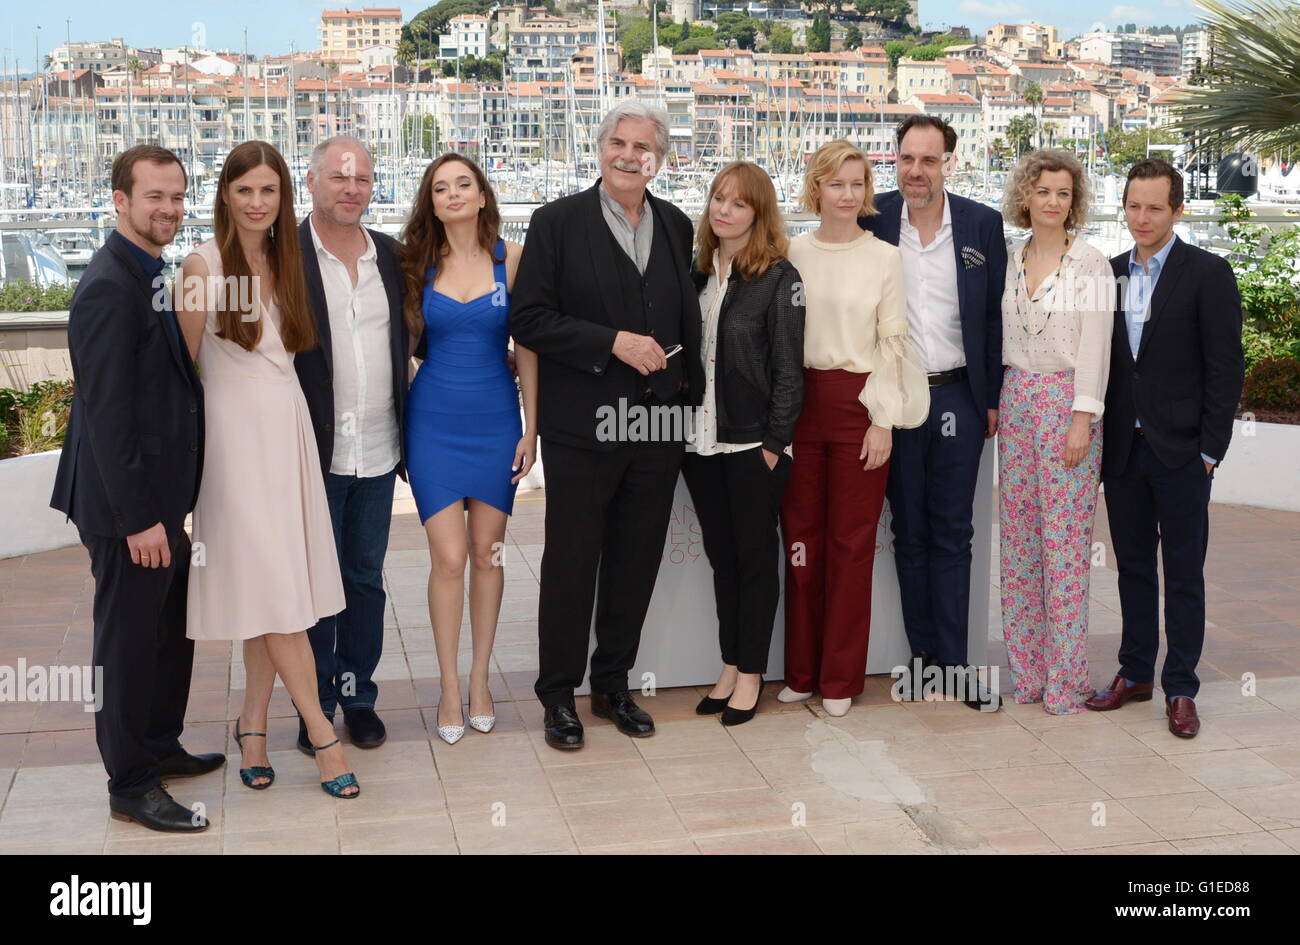 Cannes, France. 11th May, 2016. CANNES, FRANCE - MAY 14: (L-R) Producers Jonas Dornbach, Janine Jackowski, actors Vlad Ivanov, Ingrid Bisu, Peter Simonischek, director Maren Ade, actors Sandra Hueller, Thomas Loibl, Lucy Russell and Trystan Puetter attends the 'Toni Erdmann' photocall during the 69th annual Cannes Film Festival at the Palais des Festivals on May 14, 2016 in Cannes, France. © Frederick Injimbert/ZUMA Wire/Alamy Live News Stock Photo